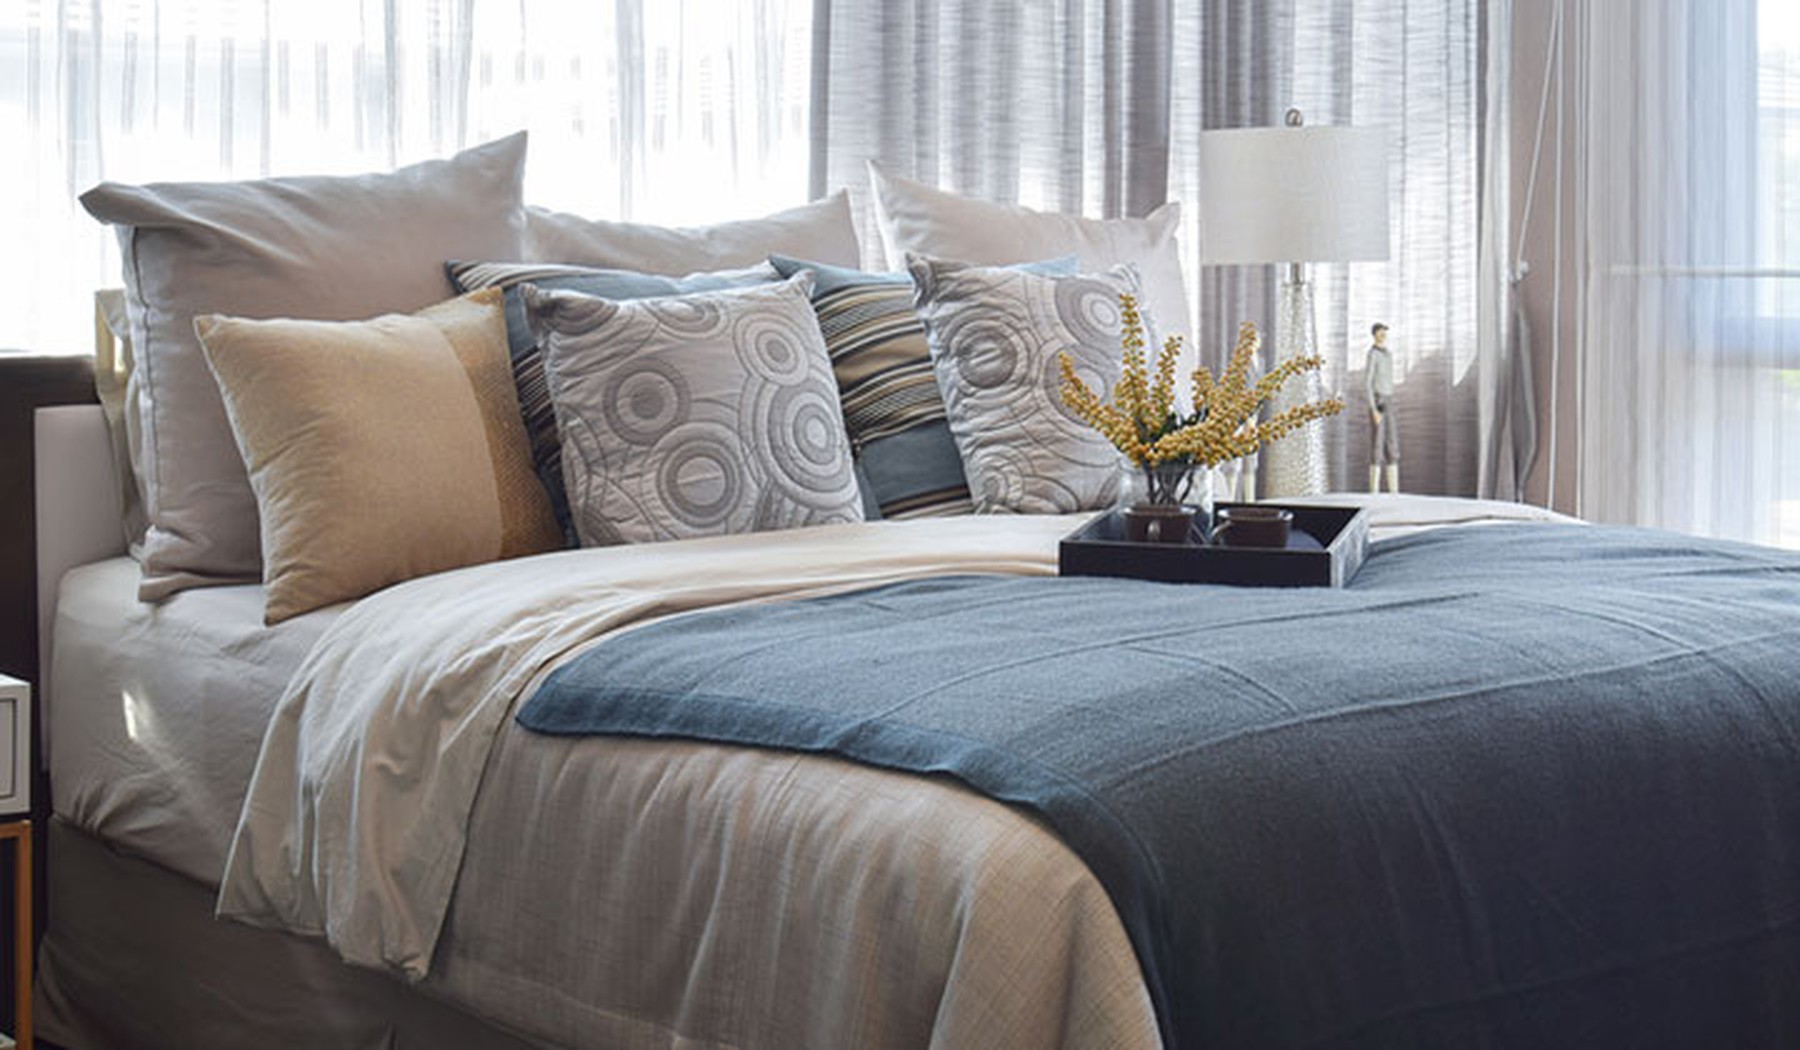 Bed with blue comforter and patterned throw pillows 